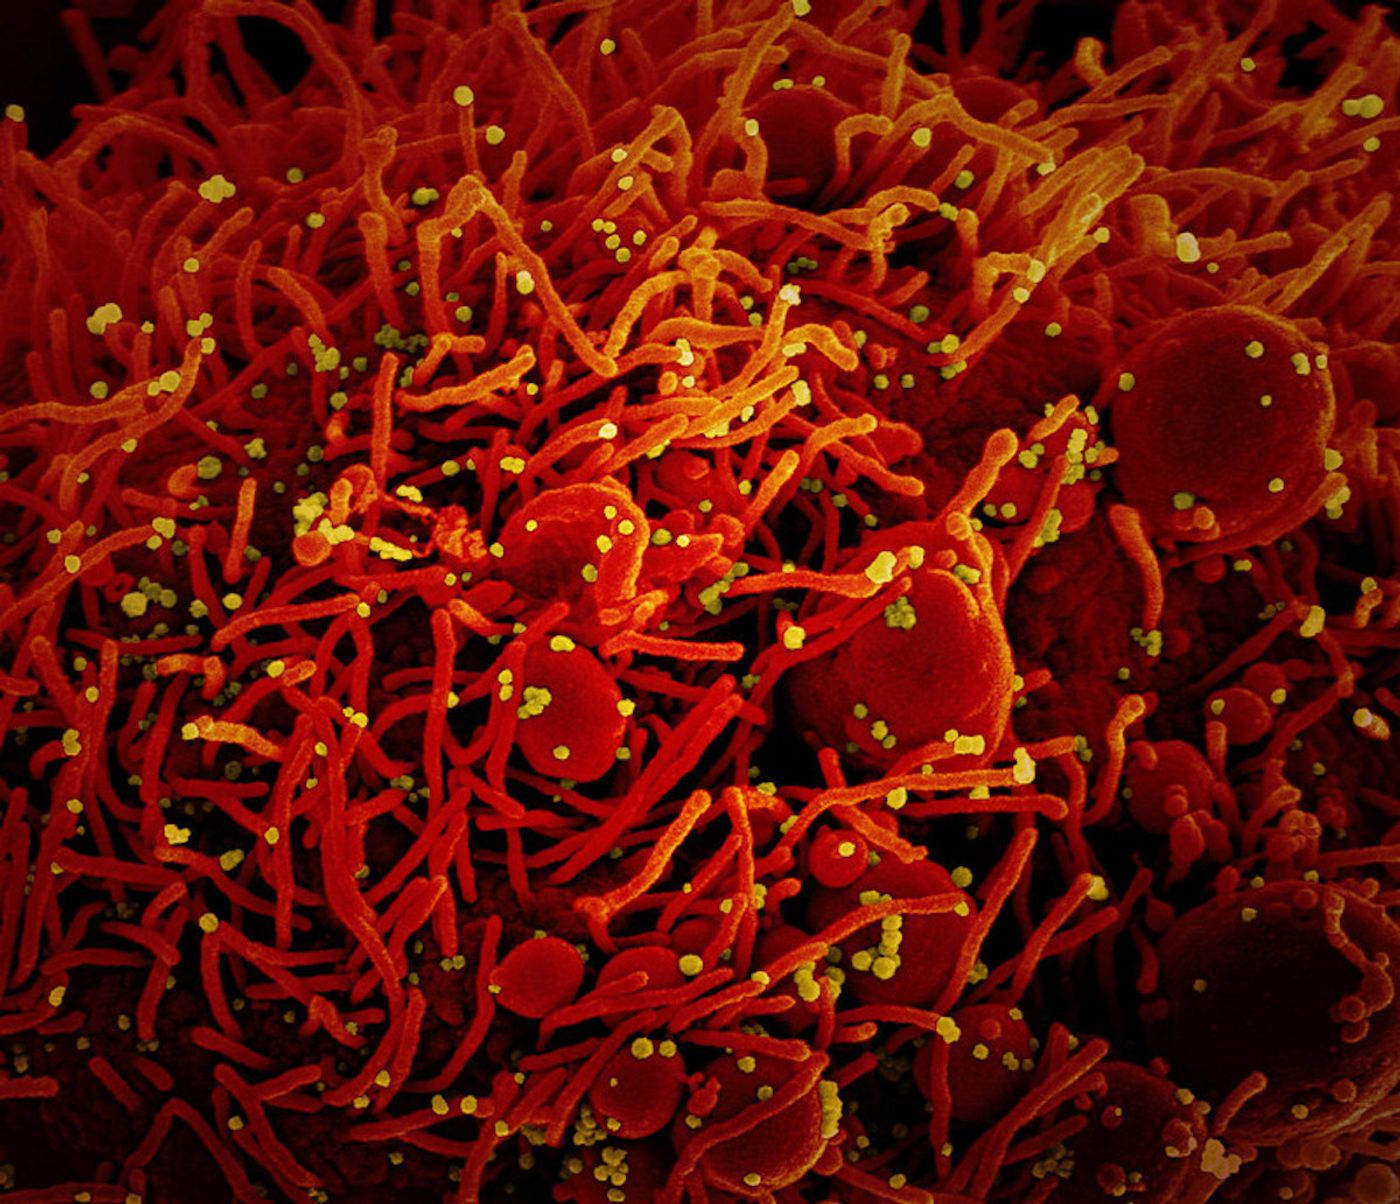 Colorized scanning electron micrograph of an apoptotic cell (red) infected with SARS-COV-2 virus particles (yellow), isolated from a patient sample. Image captured at the NIAID Integrated Research Facility (IRF) in Fort Detrick, Maryland. / Credit: NIAID